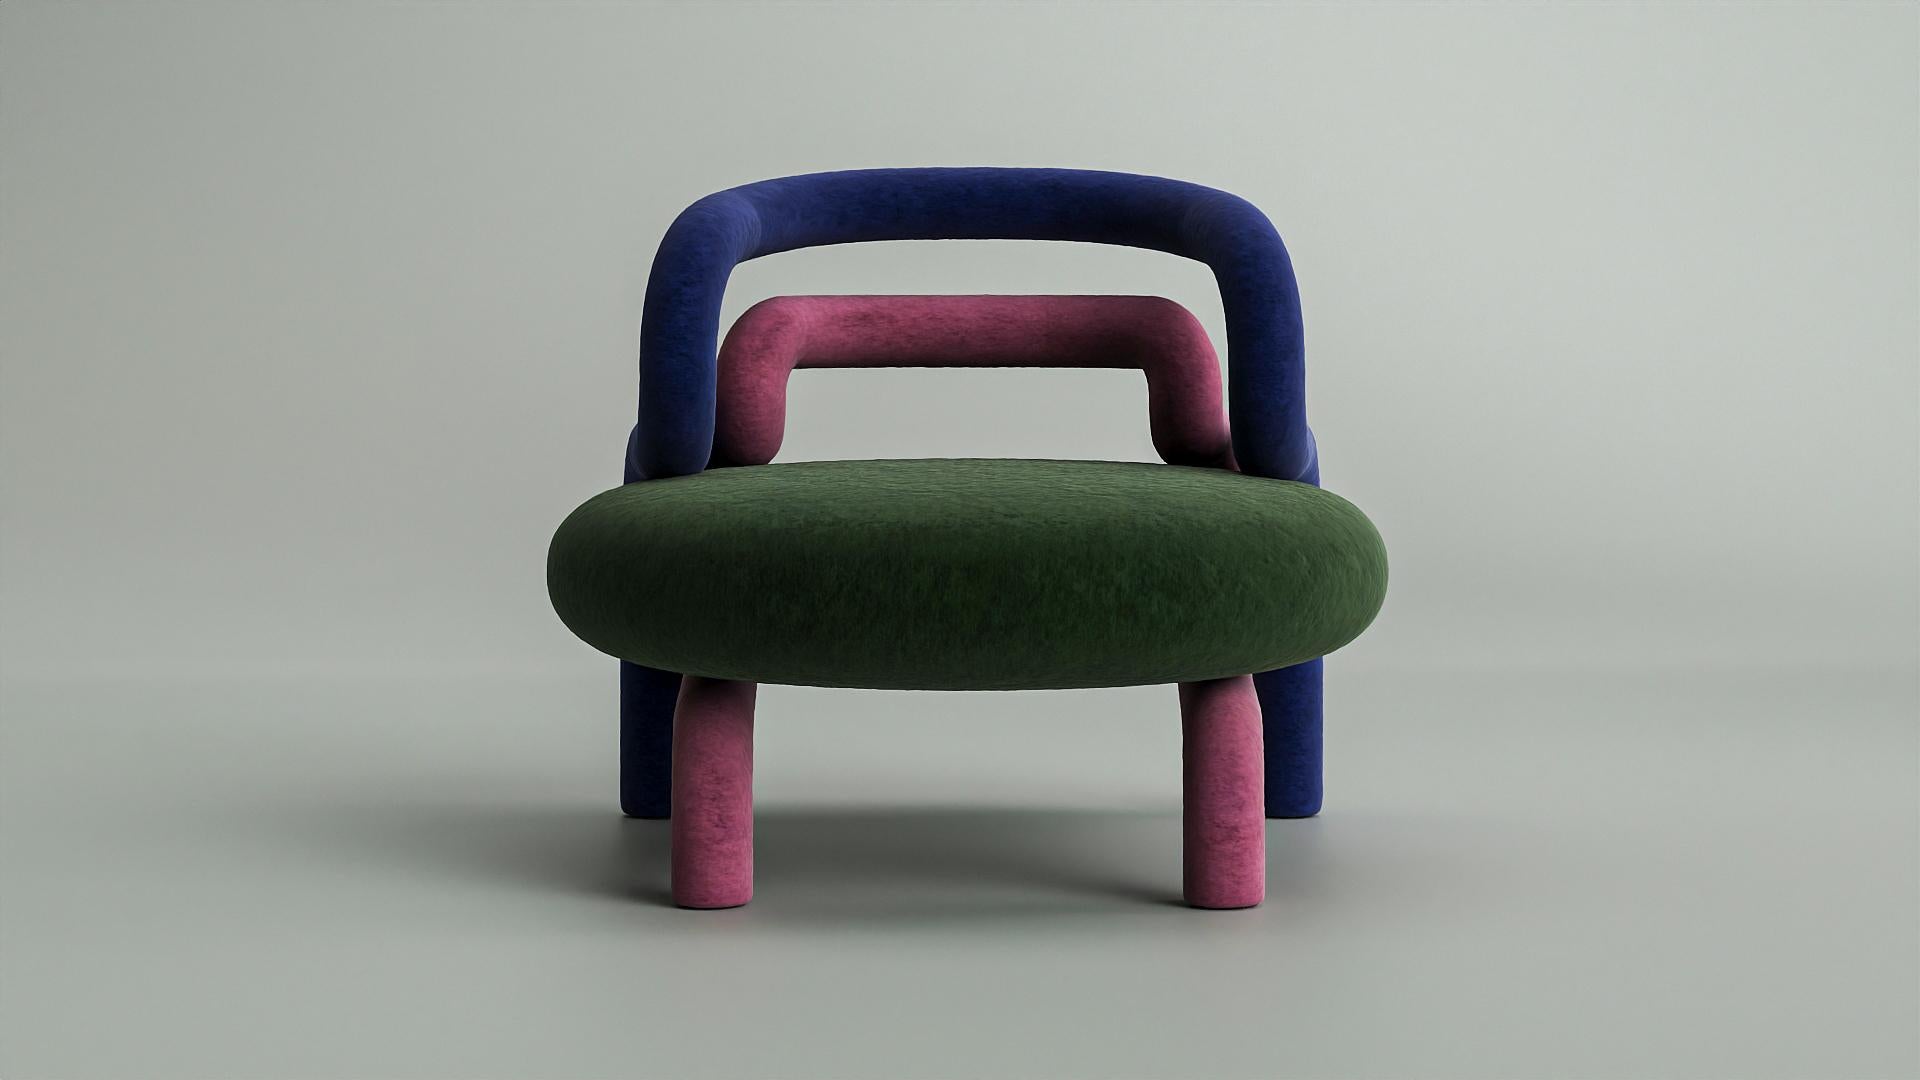 Chloroplast Chair by Taras Yoom
Limited Edition of 50
Dimensions: D 72 x W 72 x H 70 cm
Materials: Wood, metal, felt.

The chair is created from a wooden frame and is sheathed with PF fabric.

A Chloroplast Chair is an interior item created with the